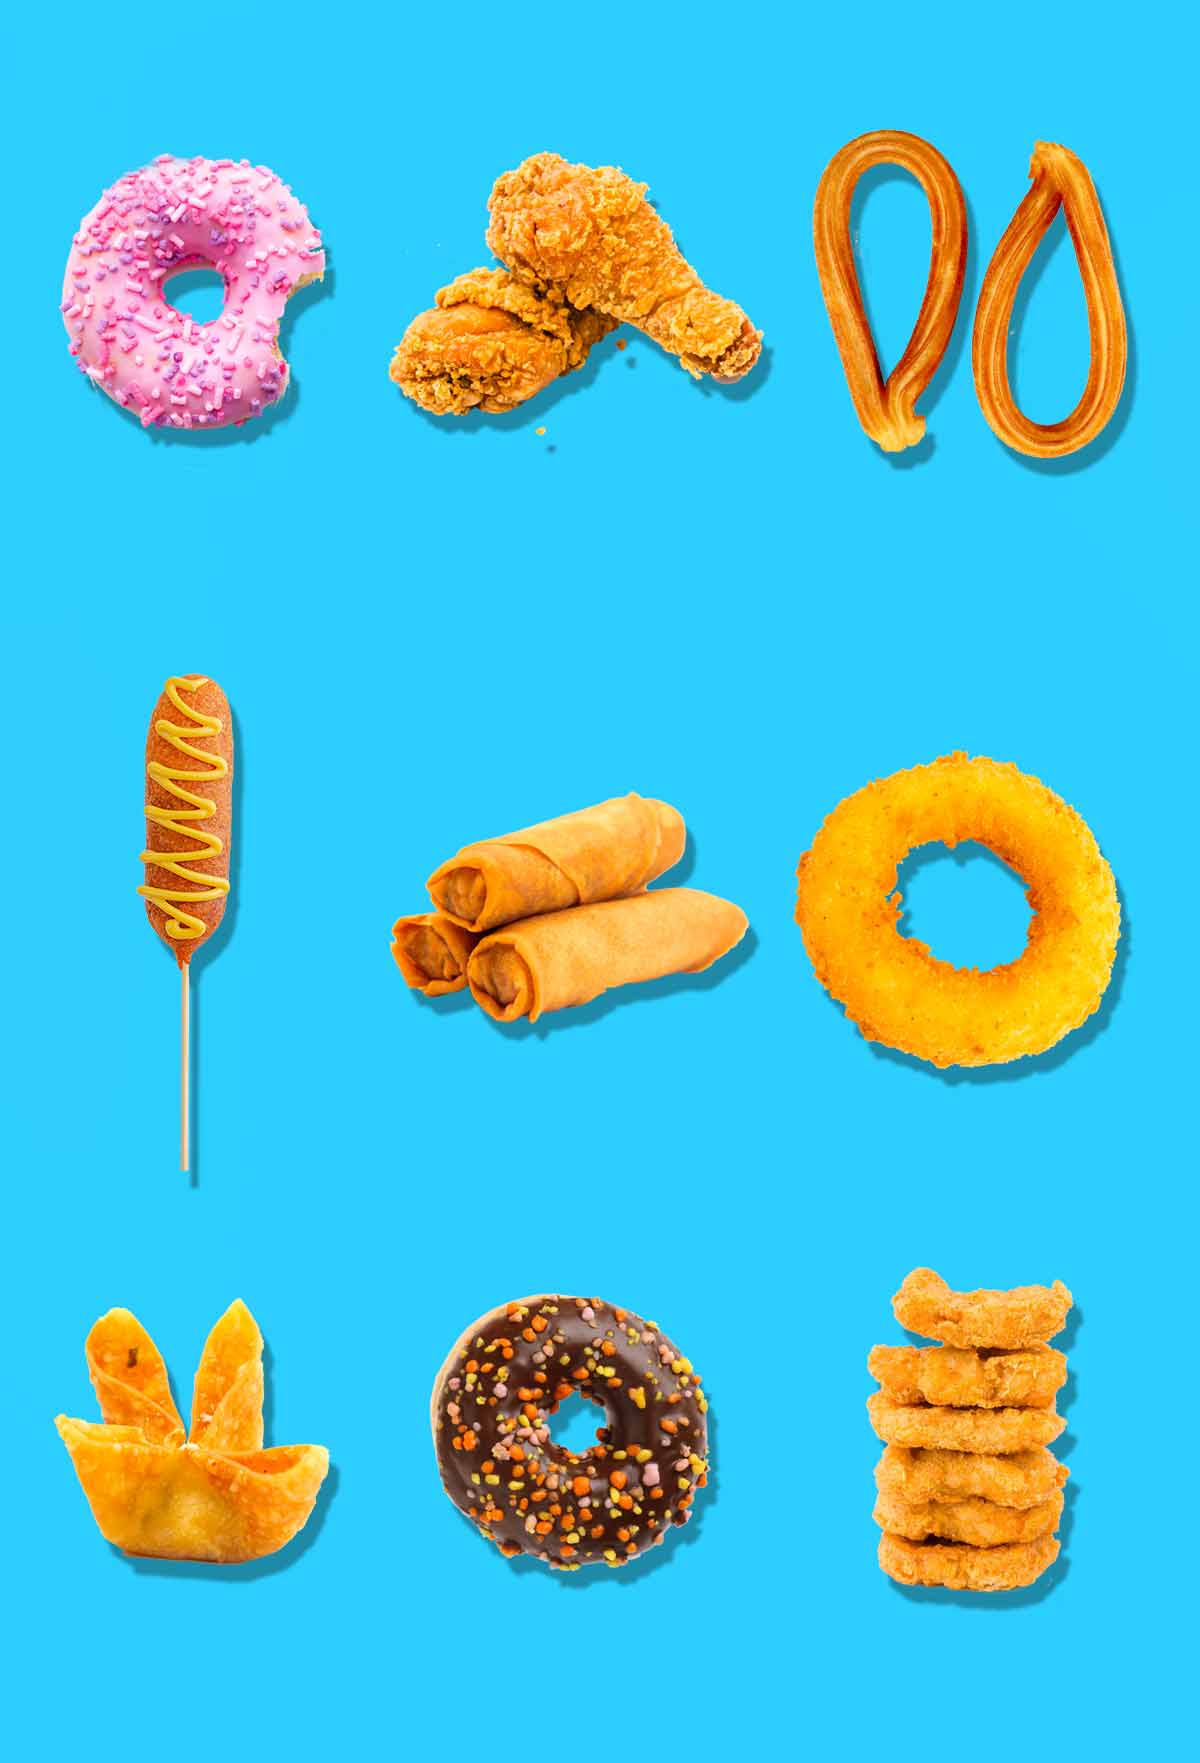 A collection of deep-fried foods including doughnuts, fried chicken, corn dogs, and onion rings.